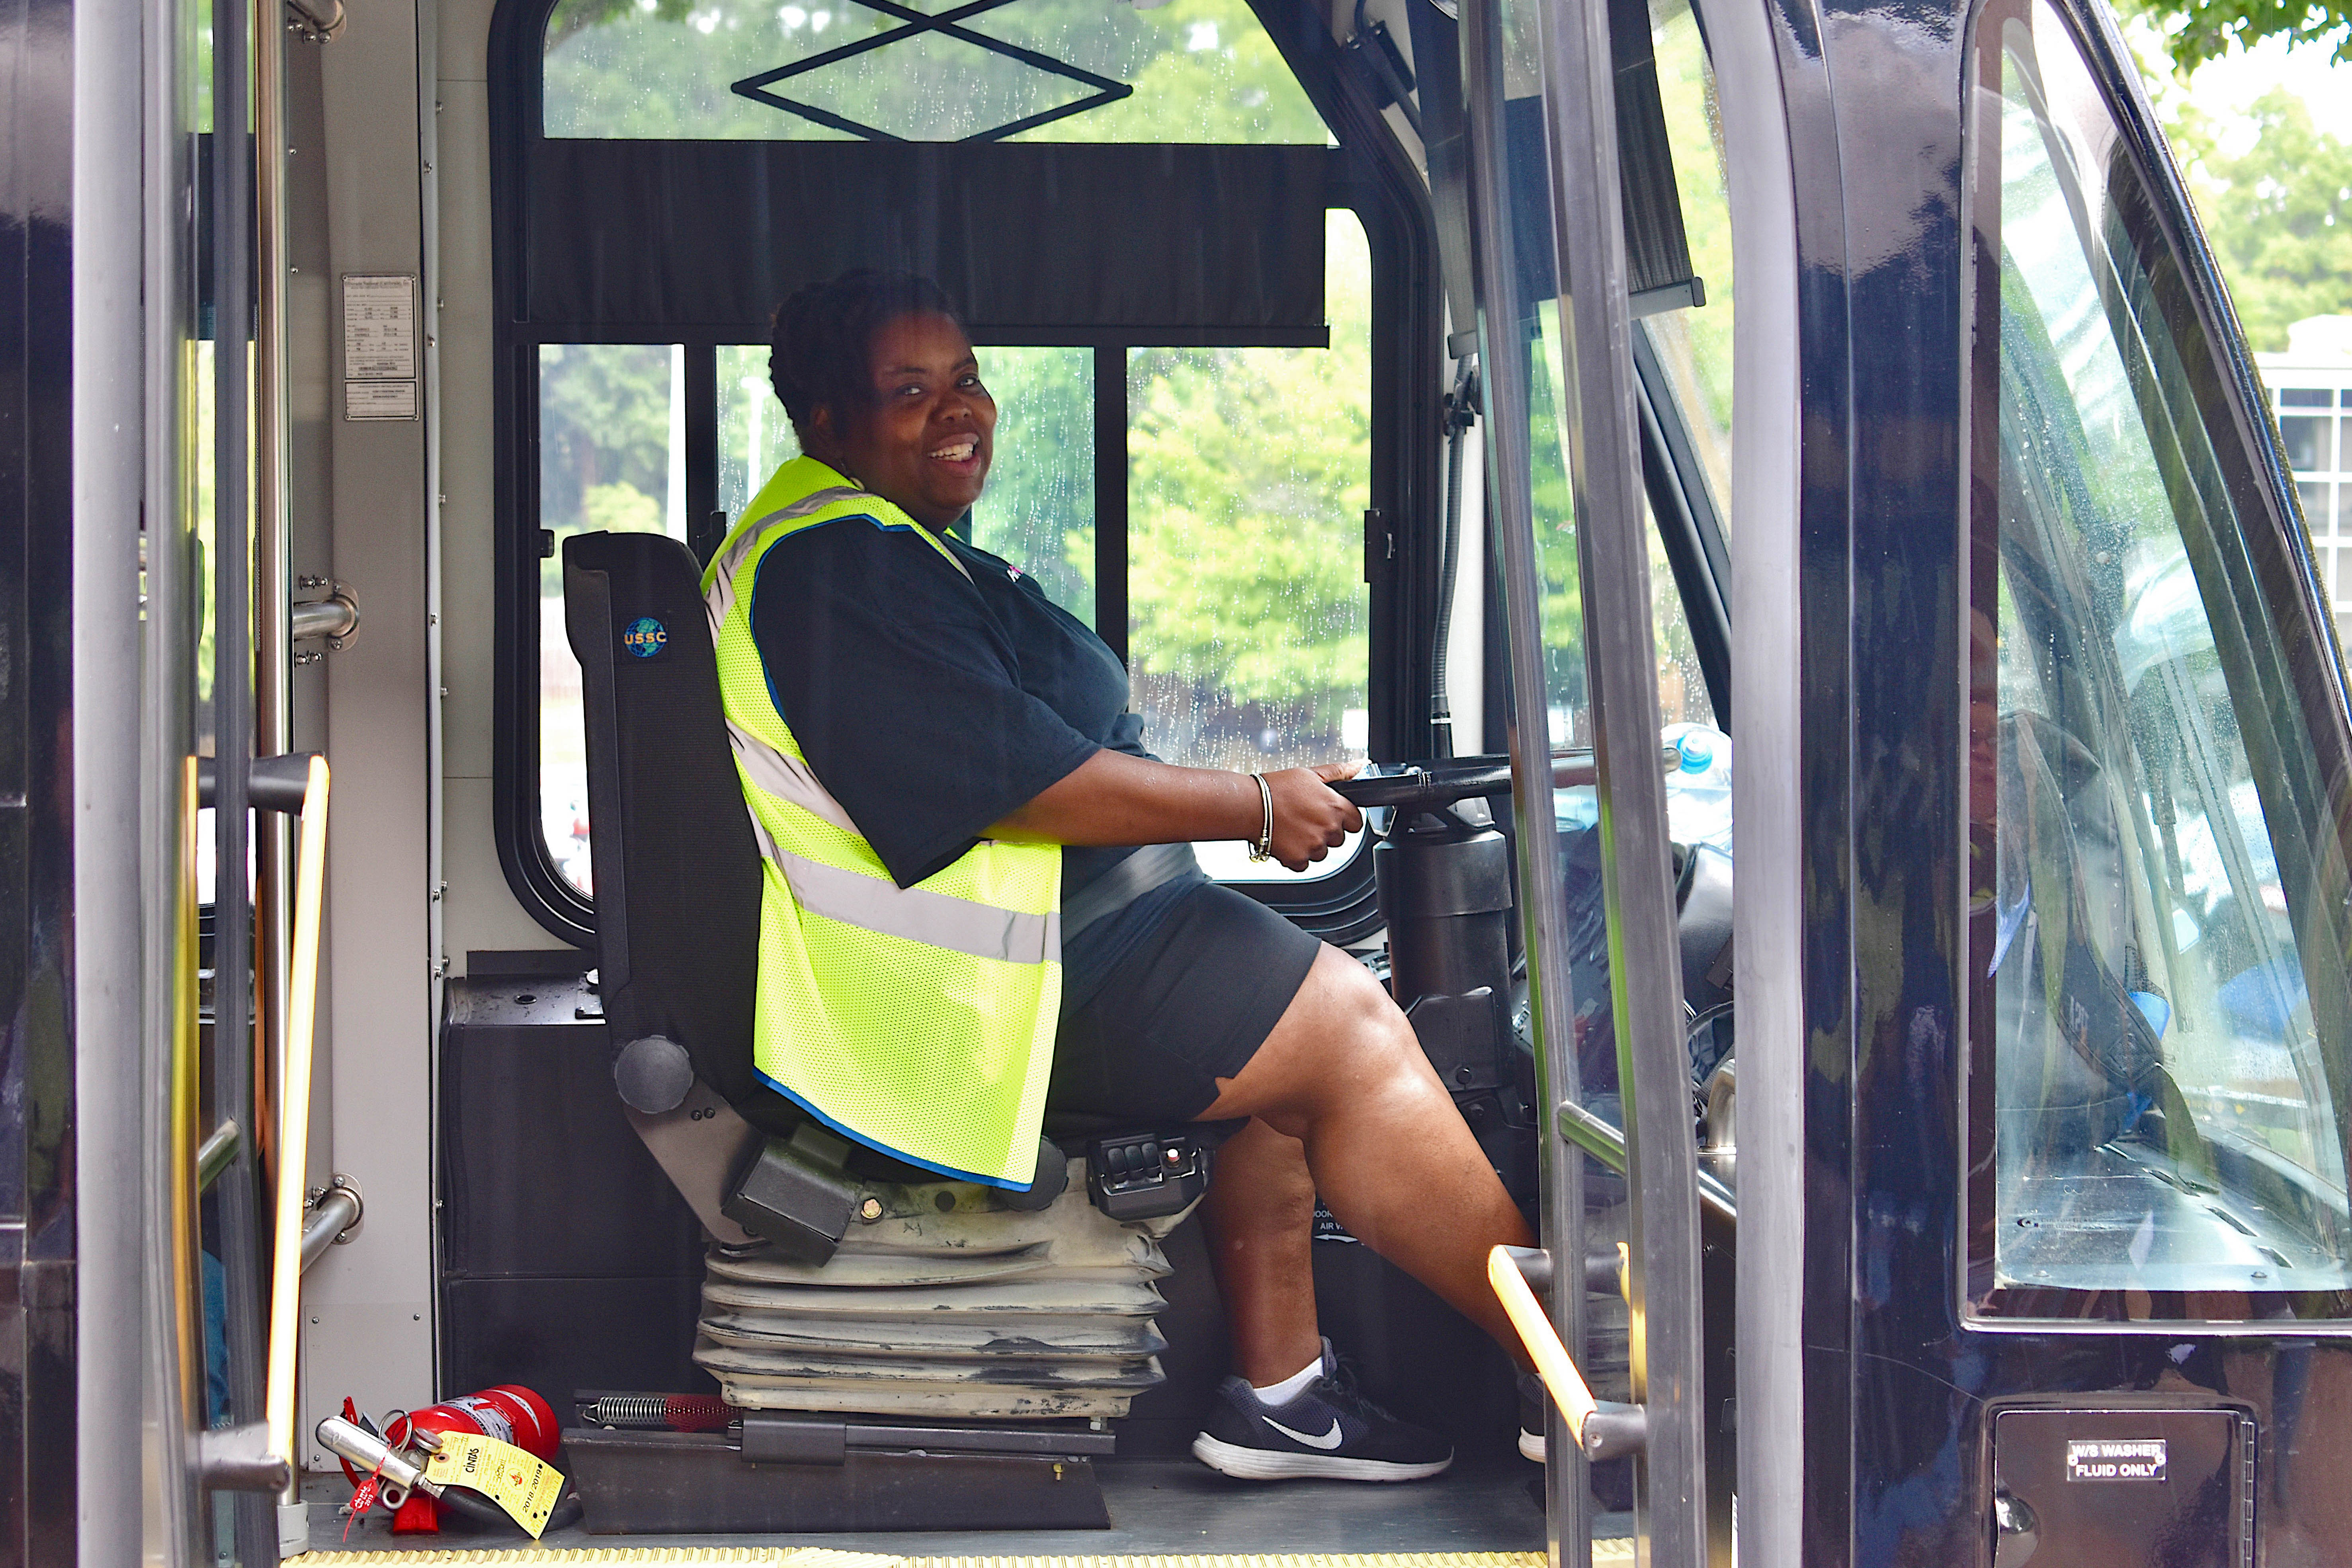 Big Owl Bus drivers deliver twofold perspectives